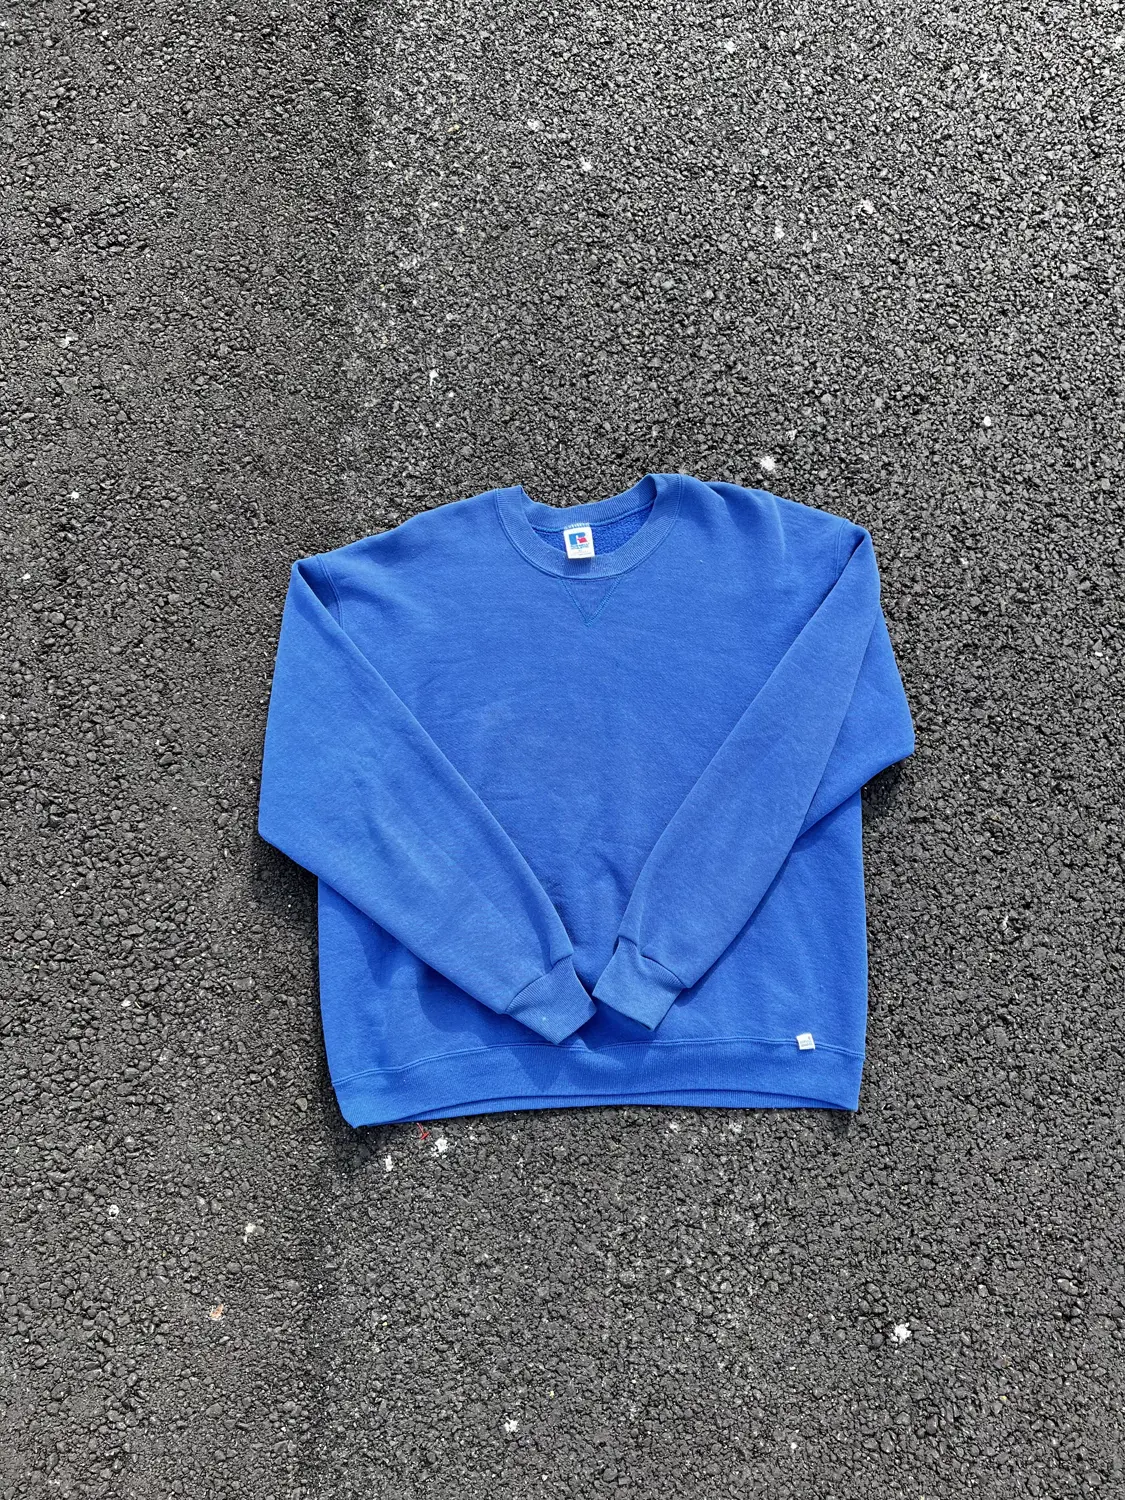 Vintage Blue Russell Crew XL